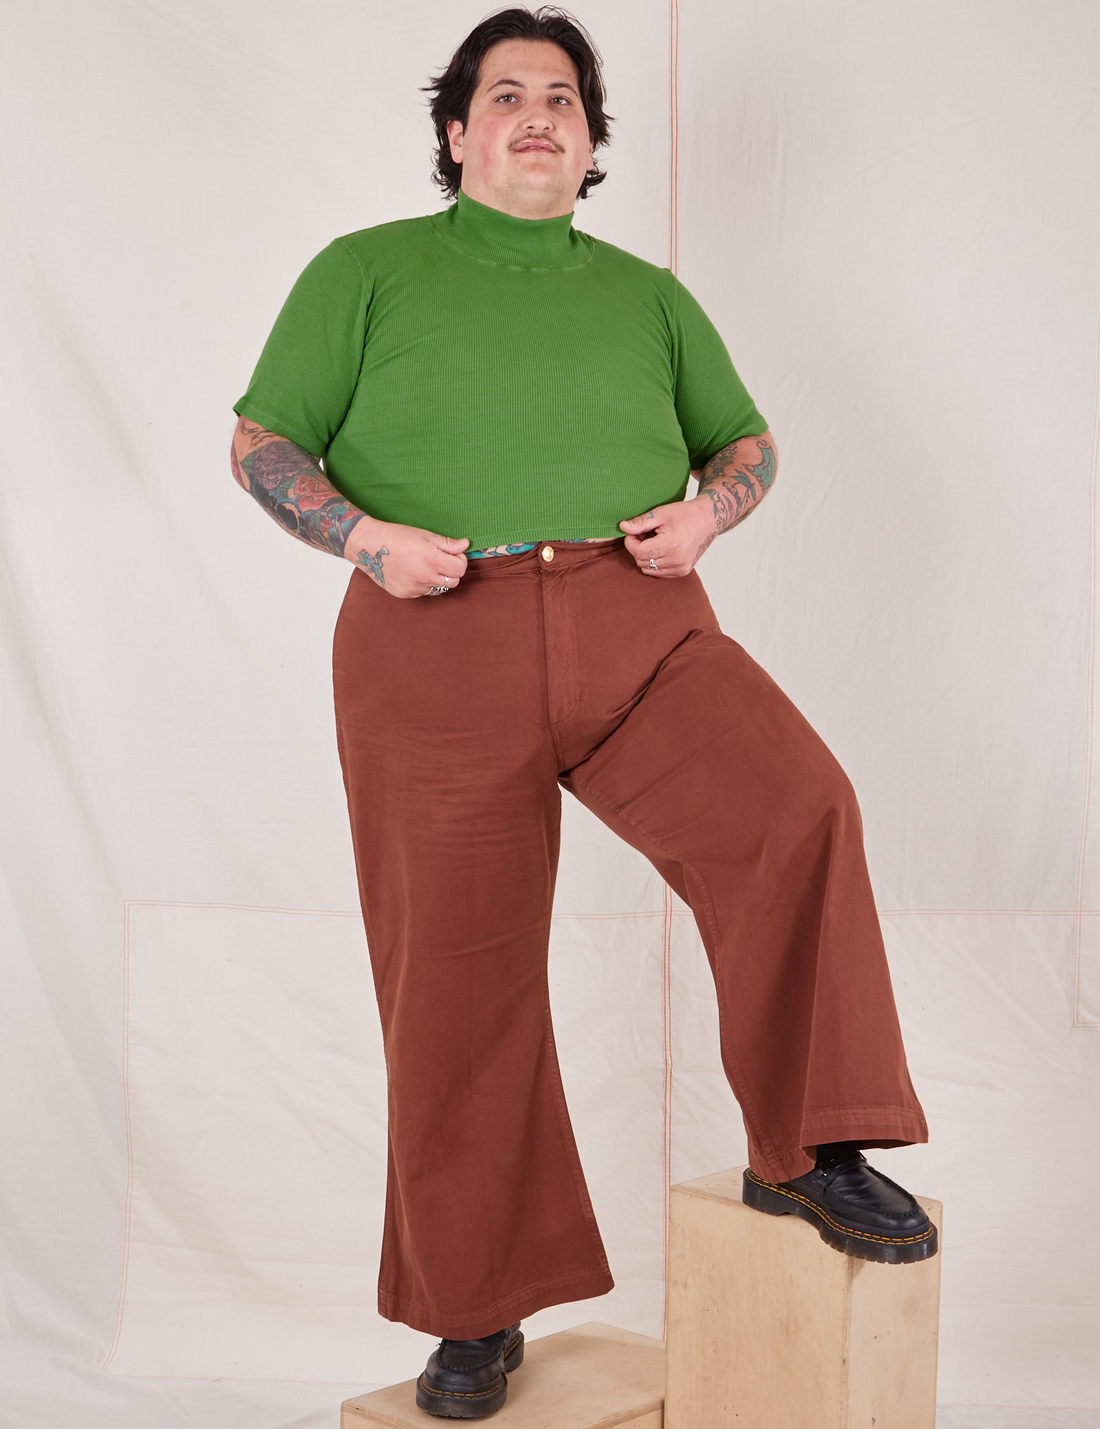 Sam is wearing size XL 1/2 Sleeve Essential Turtleneck in Bright Olive paired with fudgesicle brown Bell Bottoms